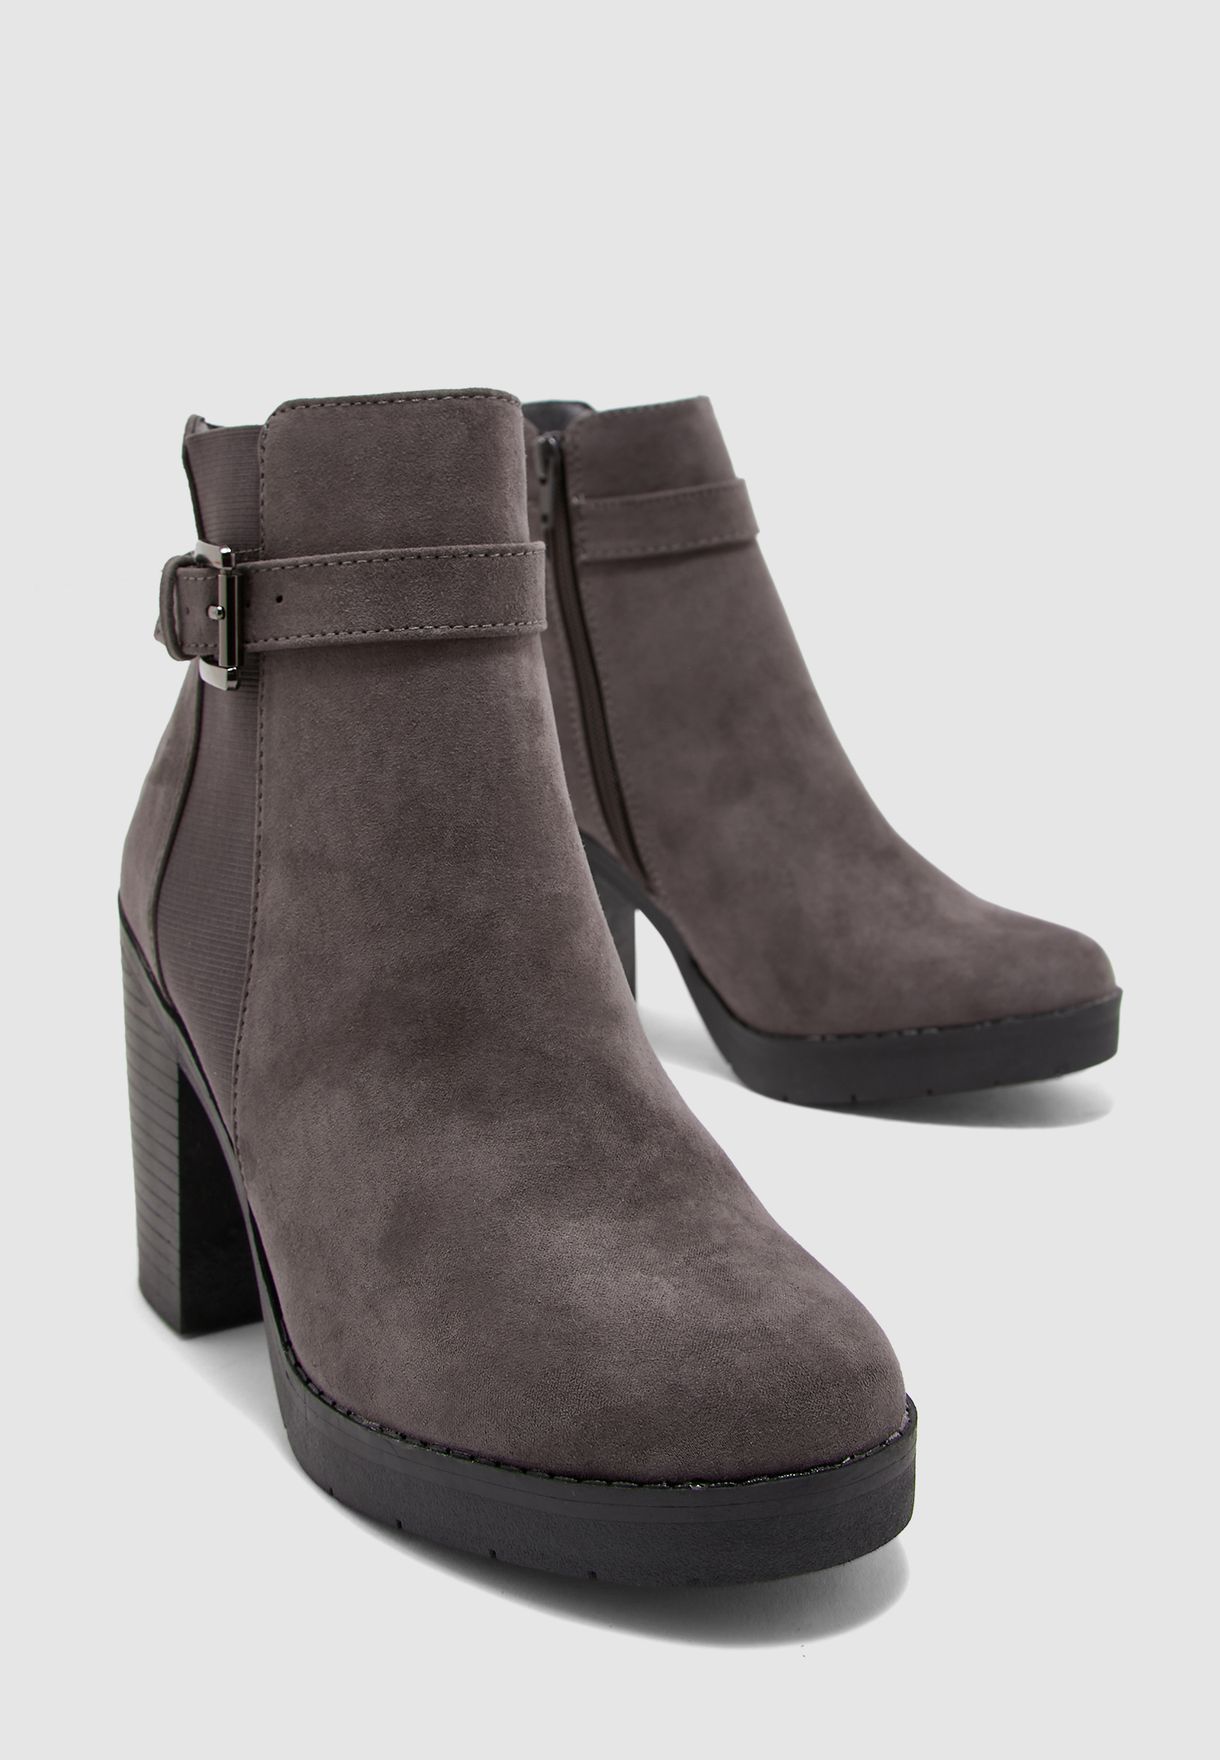 dorothy perkins grey ankle boots